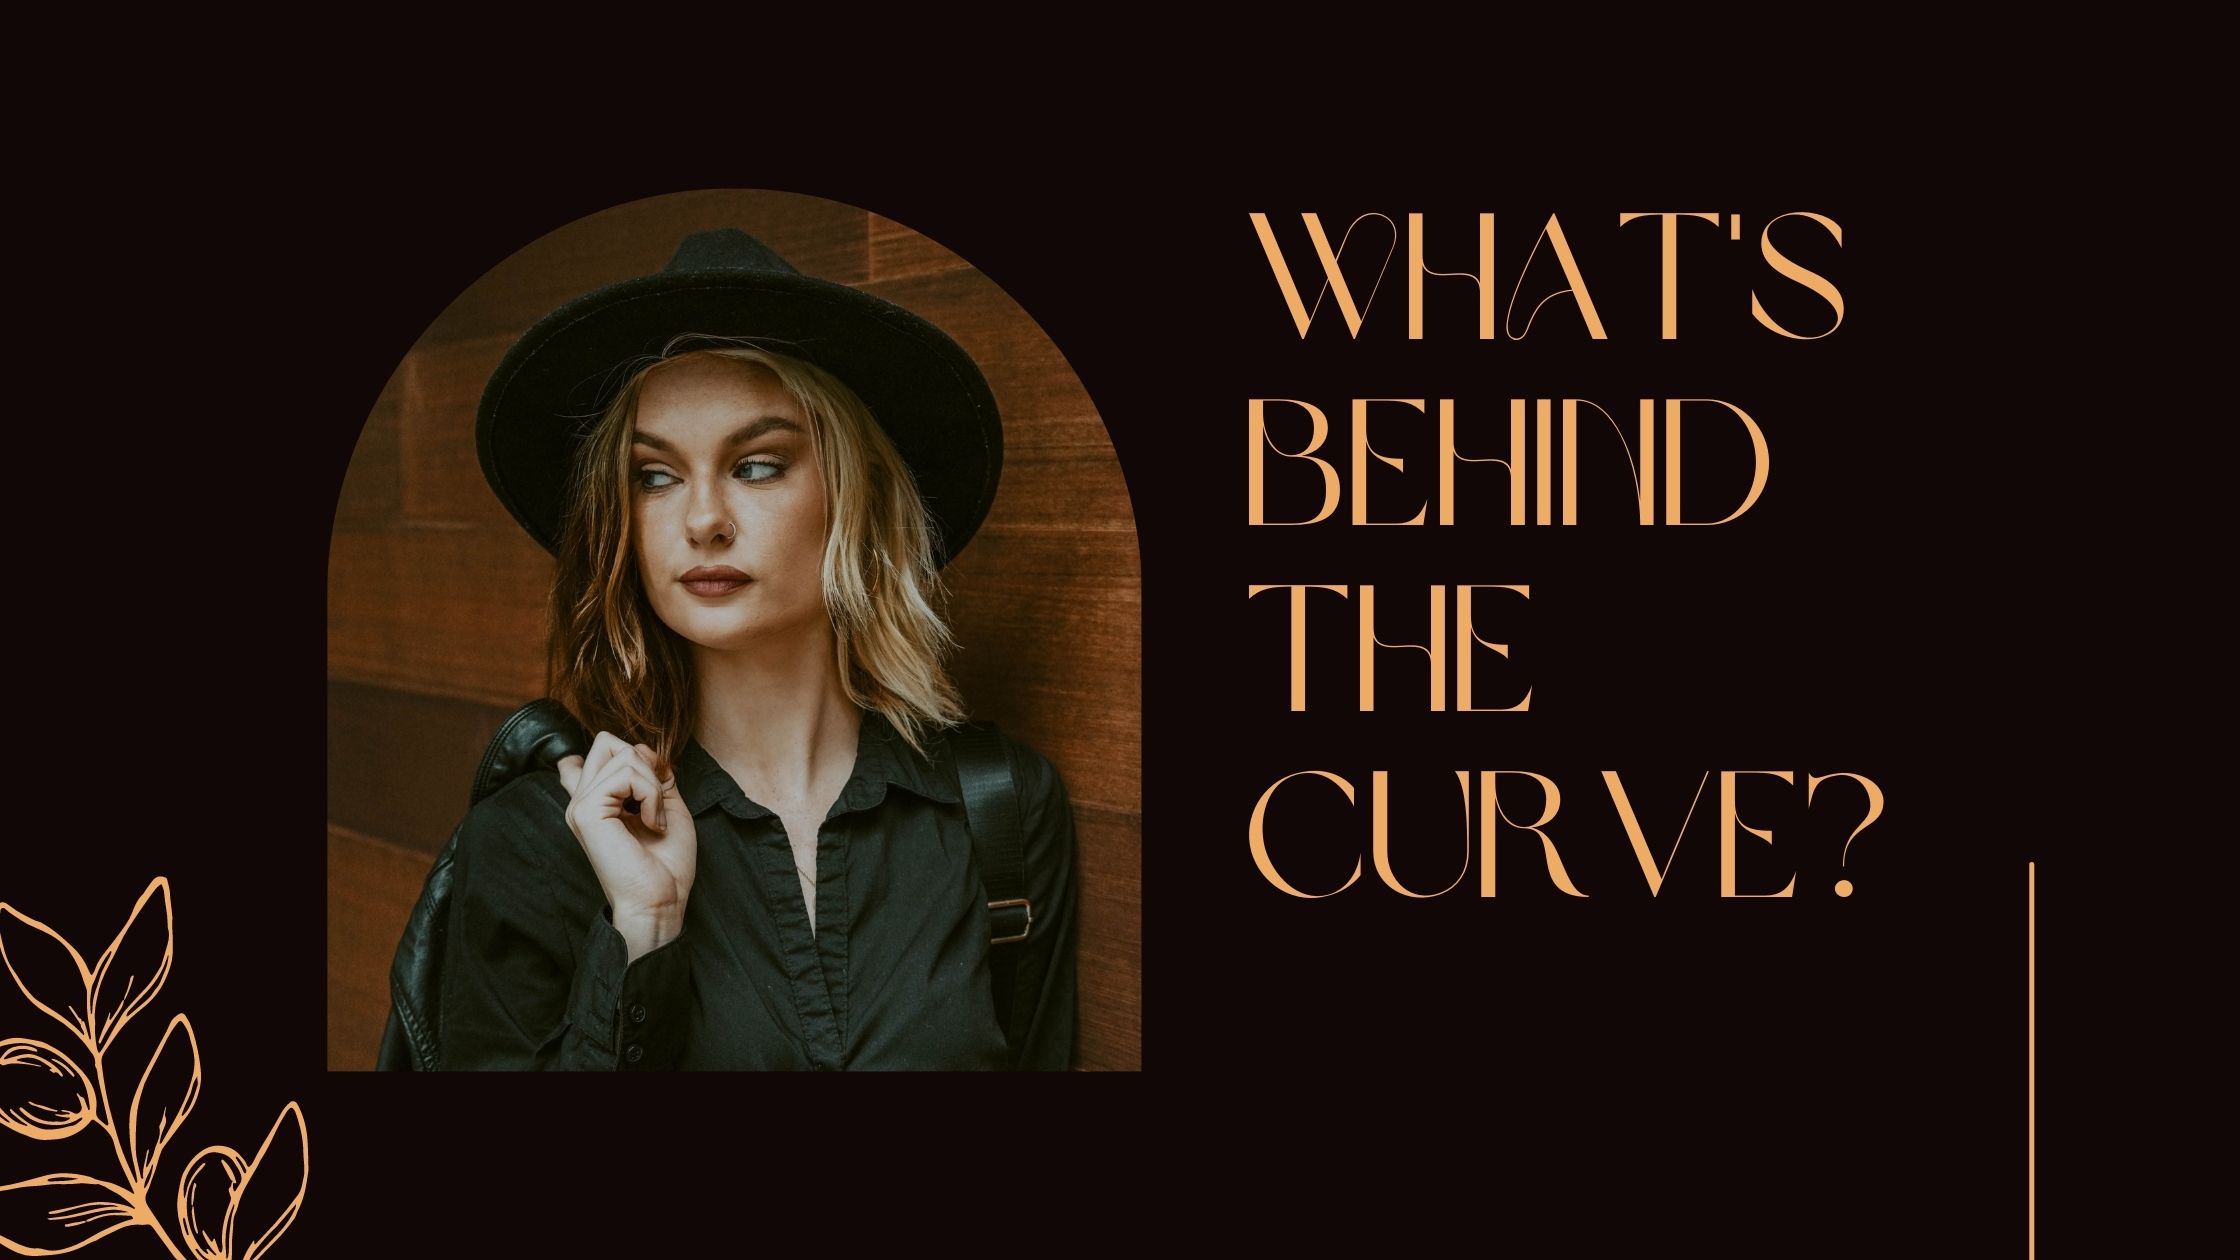 What's Behind the Curve